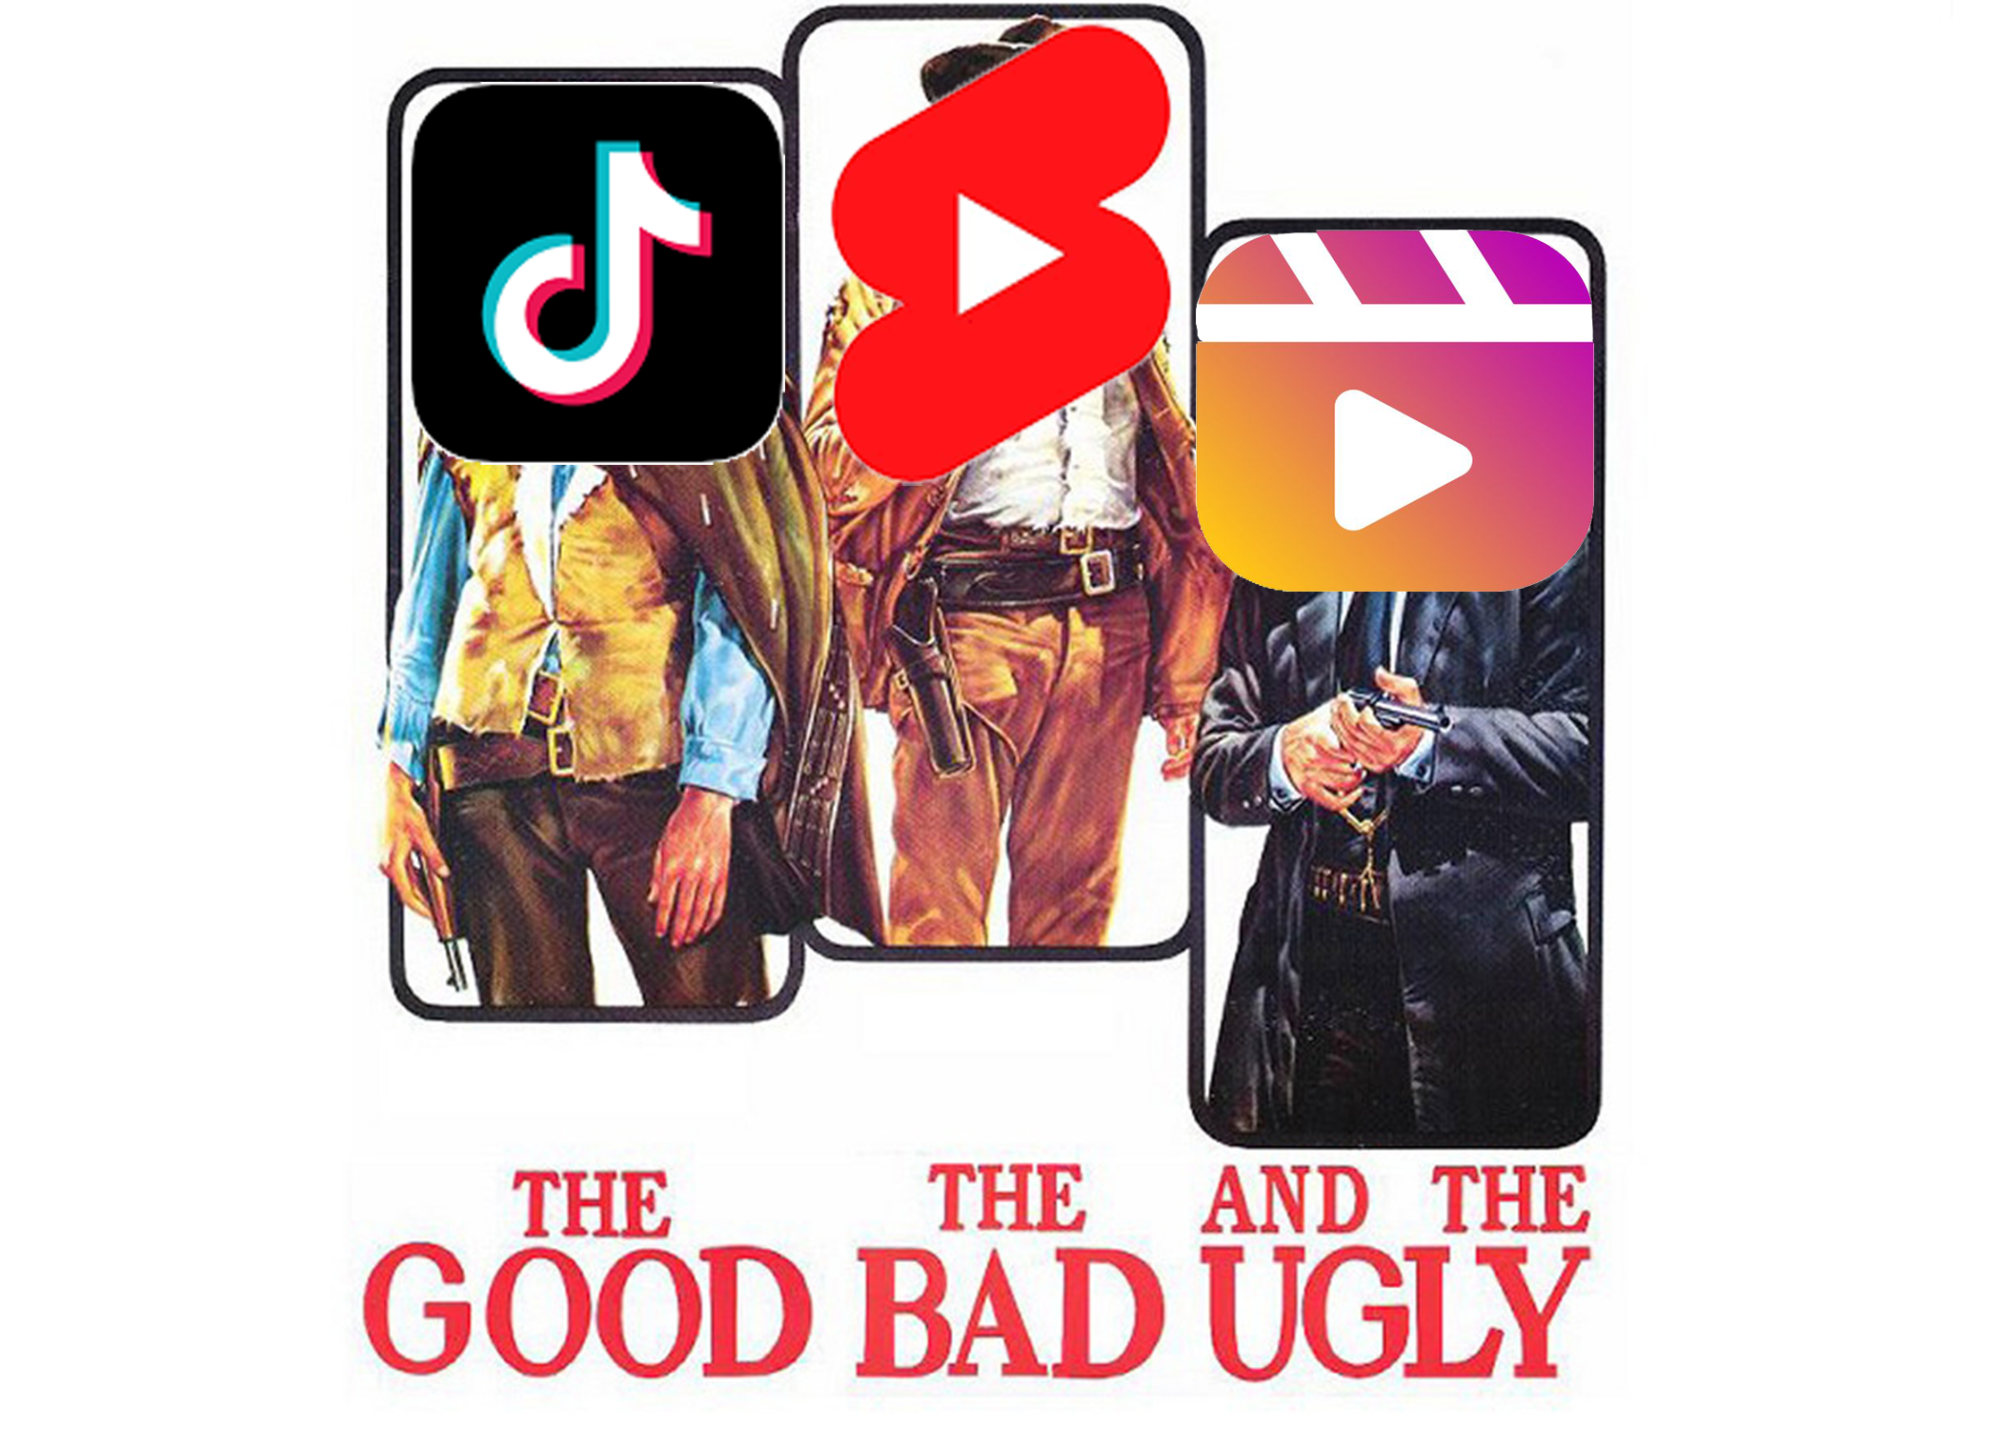 Short form content: The Good the Bad and the Ugly